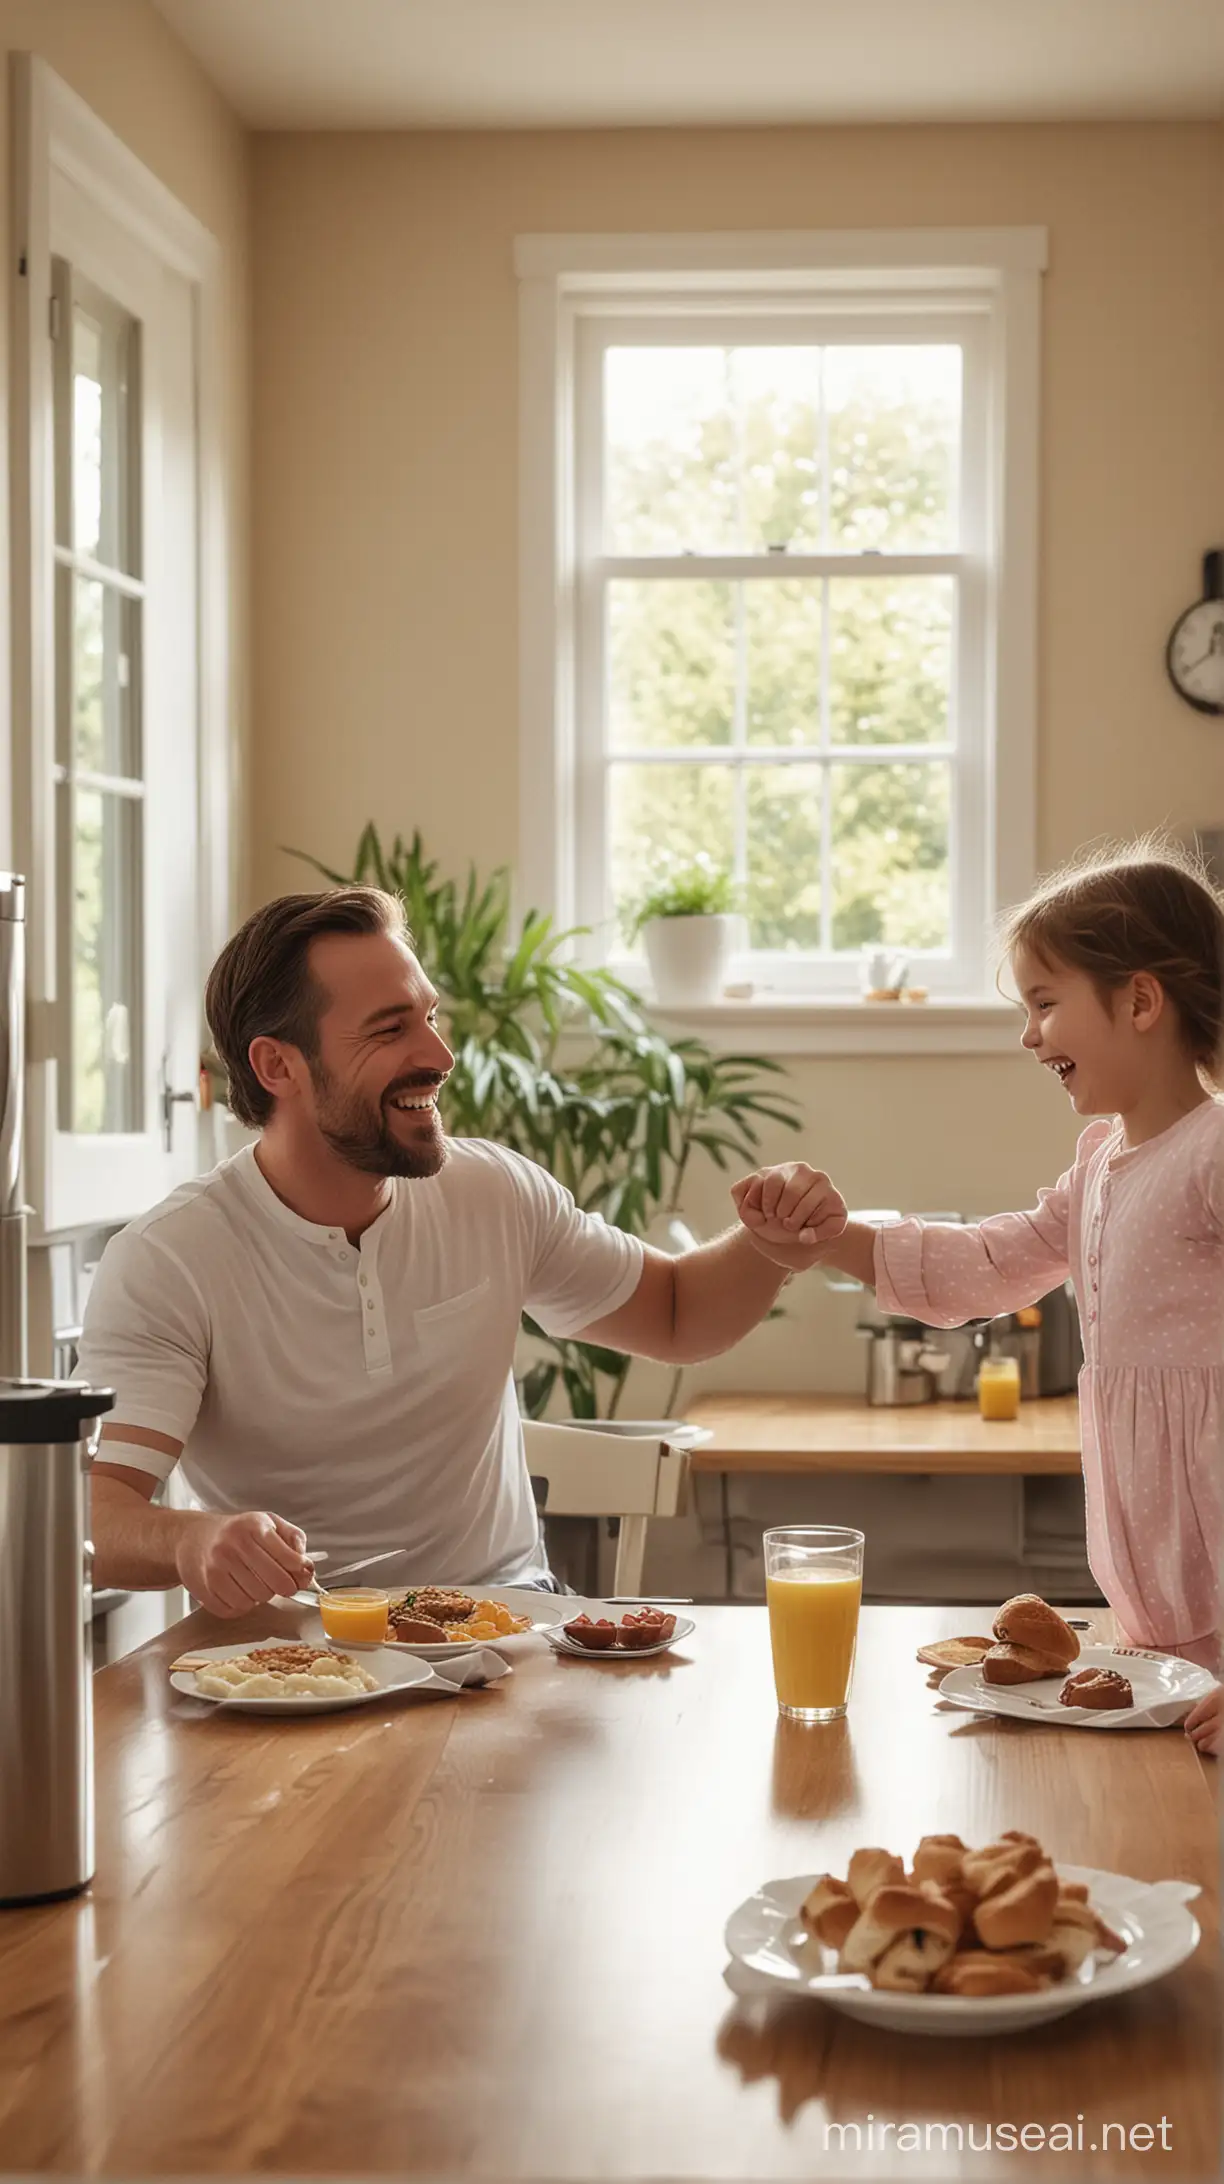 A touching scene of a loving father and his five year old daughter. The father is sitting at the breakfast table, enjoying his meal, while the little girl, with a cute smile, runs towards him with open arms. The father's expression is one of joy and affection as he prepares to embrace his little daughter full of joy. In the background you can see a cozy kitchen with a window that overlooks a quiet garden.